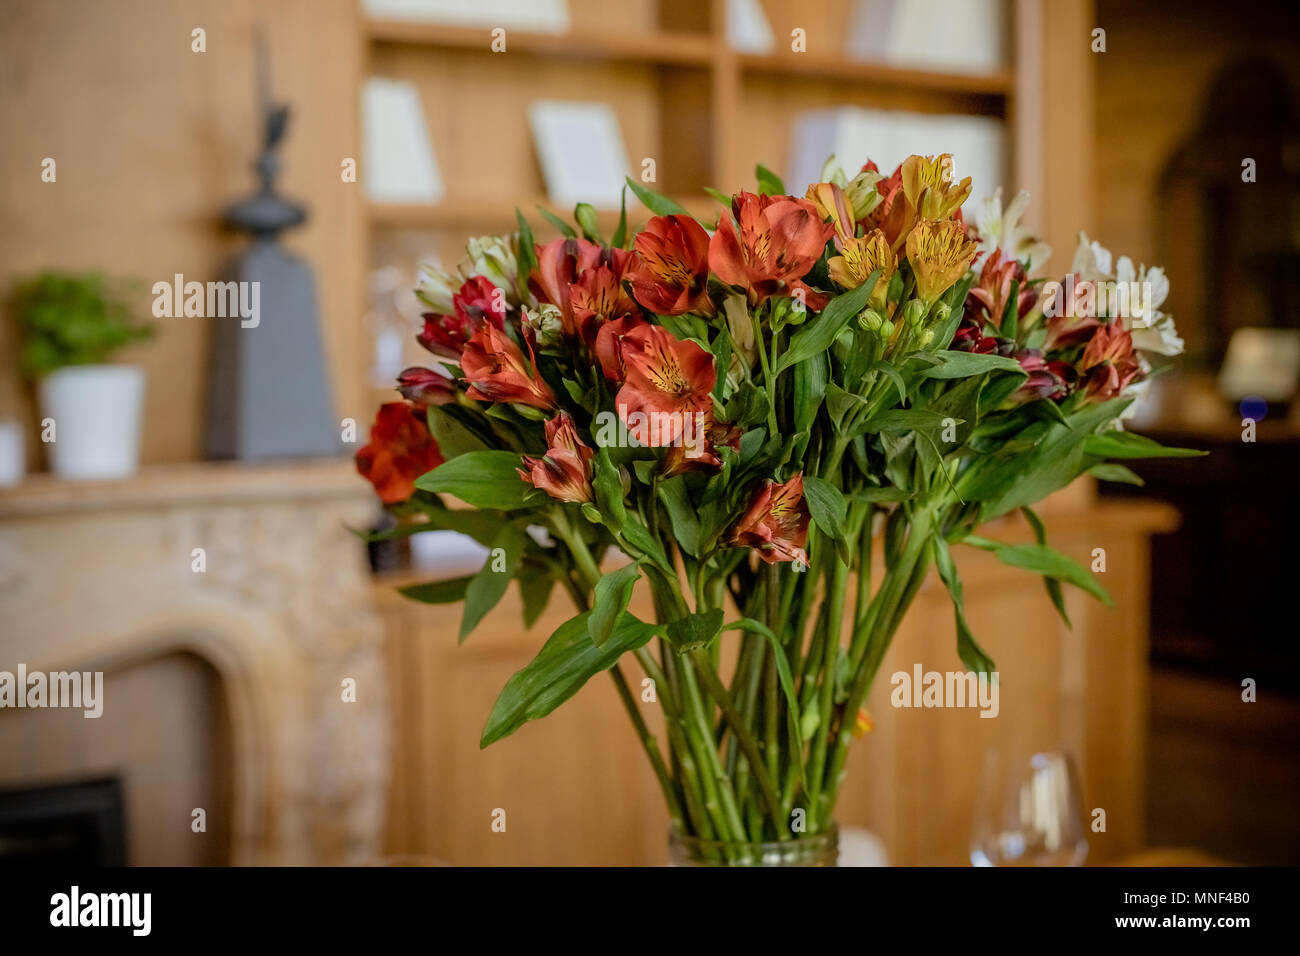 Beautiful bouquet of colorful flowers,Alstroemeria.Lily of the Incas, gorgeous red, orange white alstroemeria bouquet, fresh bright flowers with yellow centers in vase. Home decoration Stock Photo